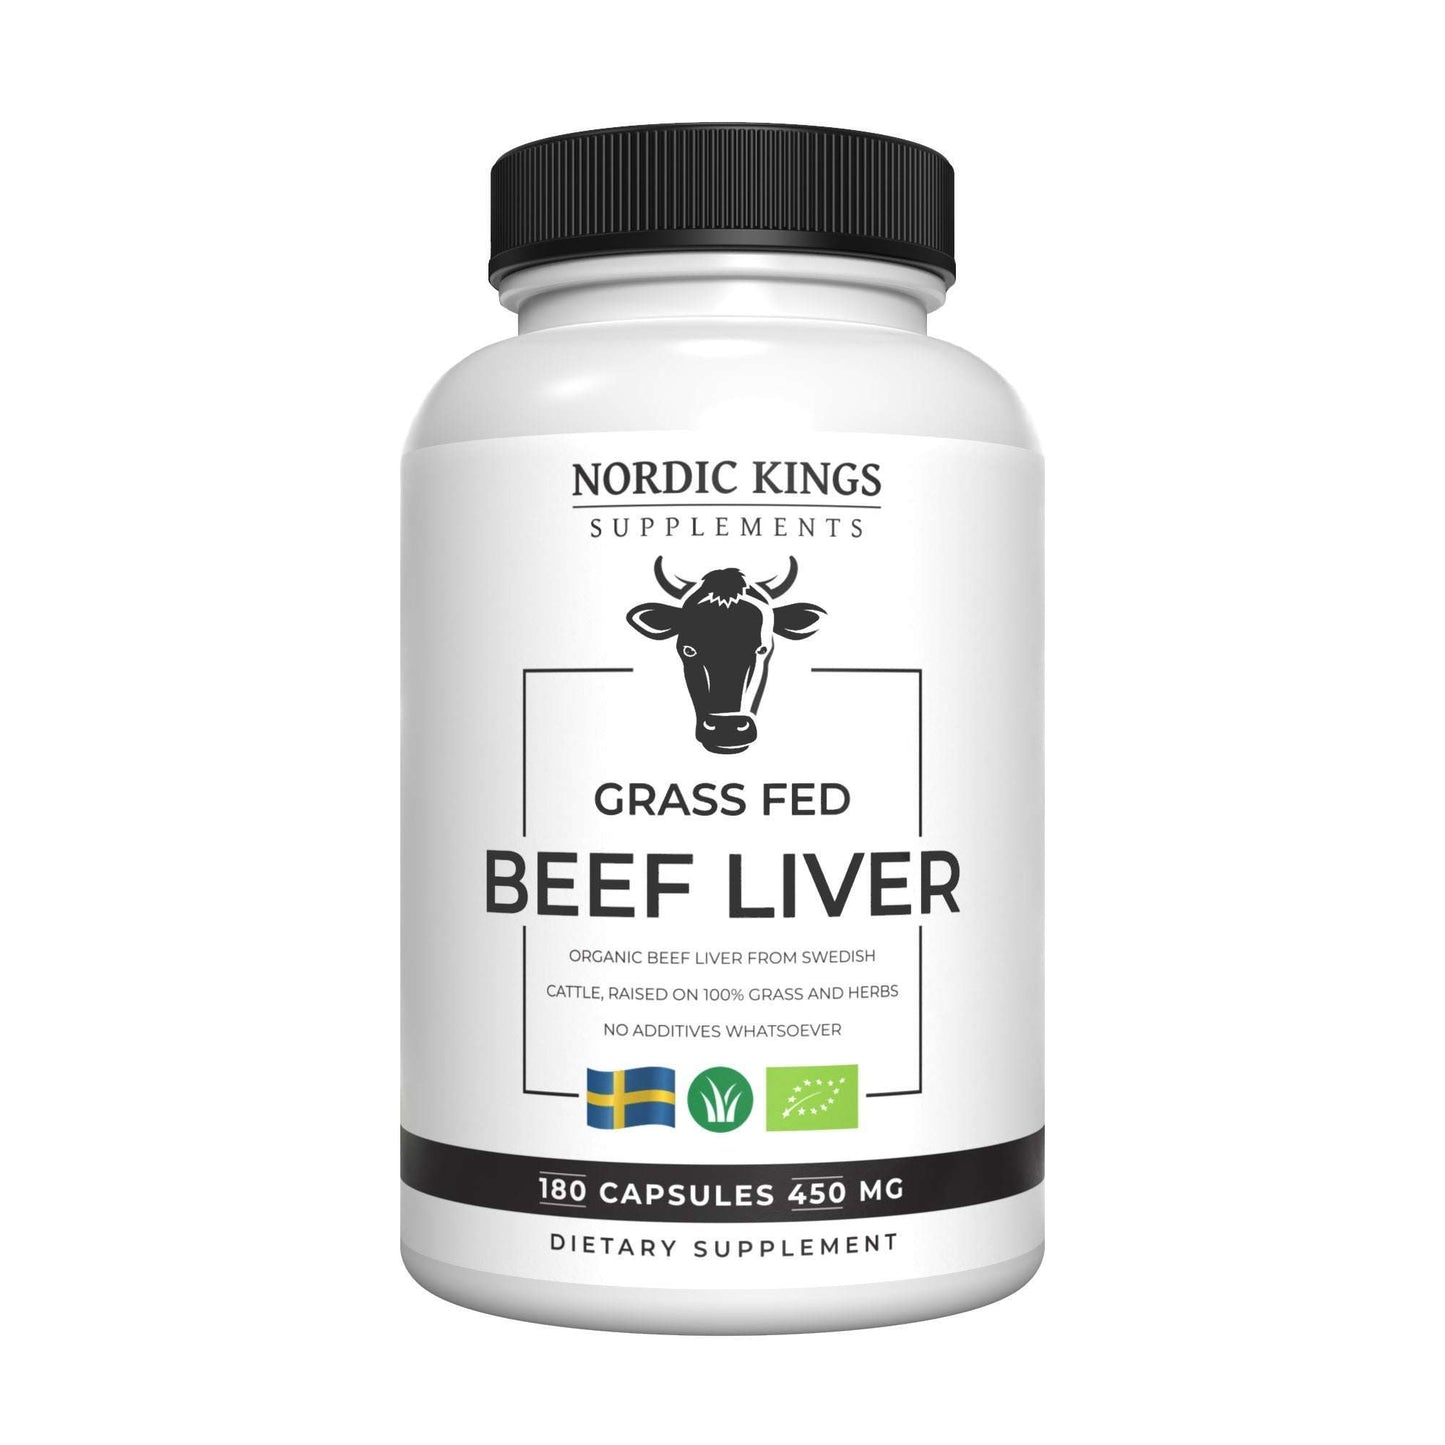 Nordic Kings Organic Grass Fed Beef Liver